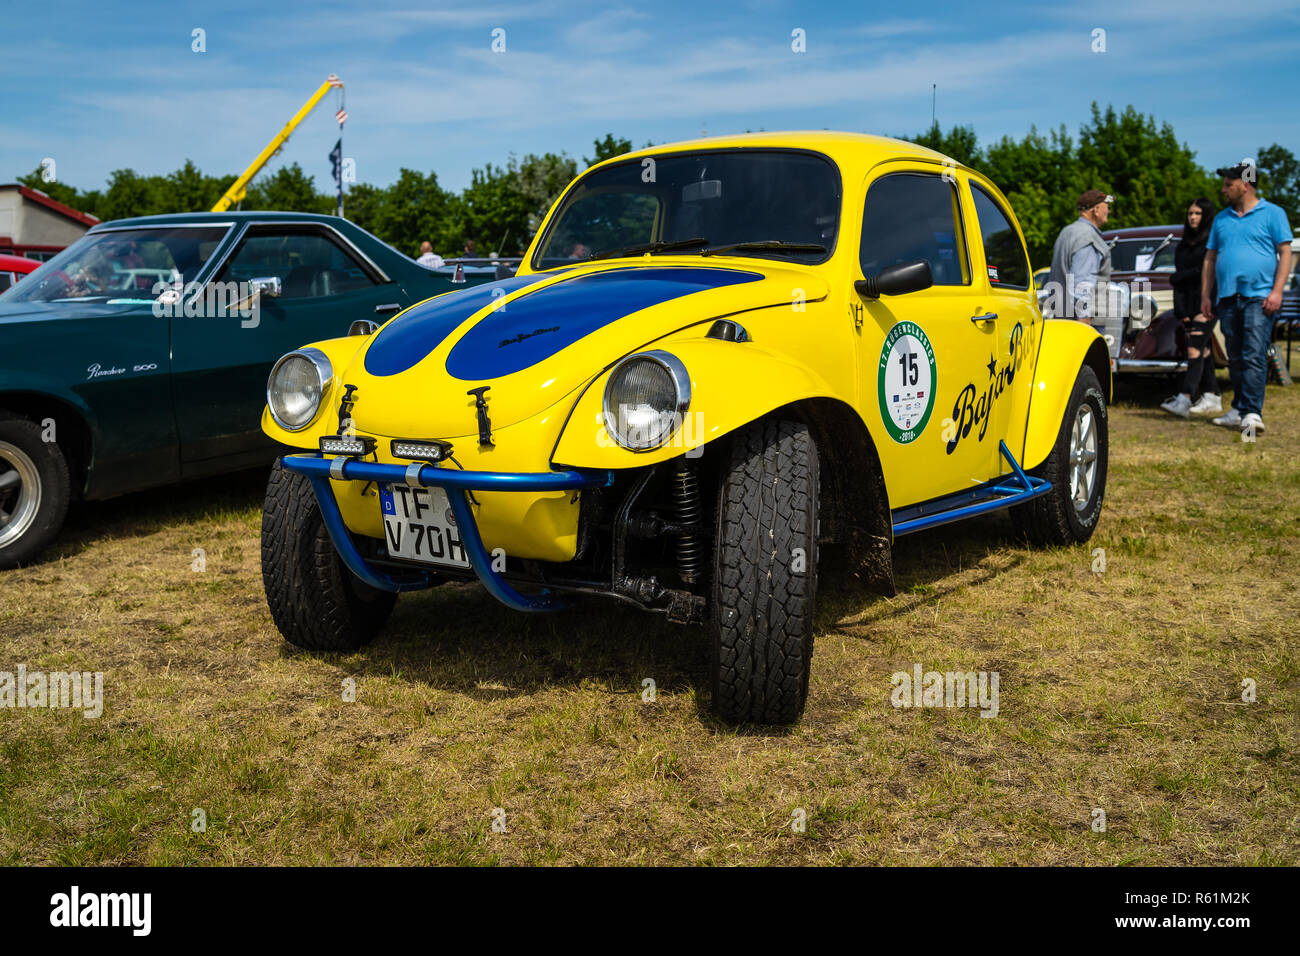 PAAREN IM GLIEN, GERMANY - MAY 19, 2018: A Baja Bug is an original Volkswagen Beetle modified to operate off-road. Die Oldtimer Show 2018. Stock Photo